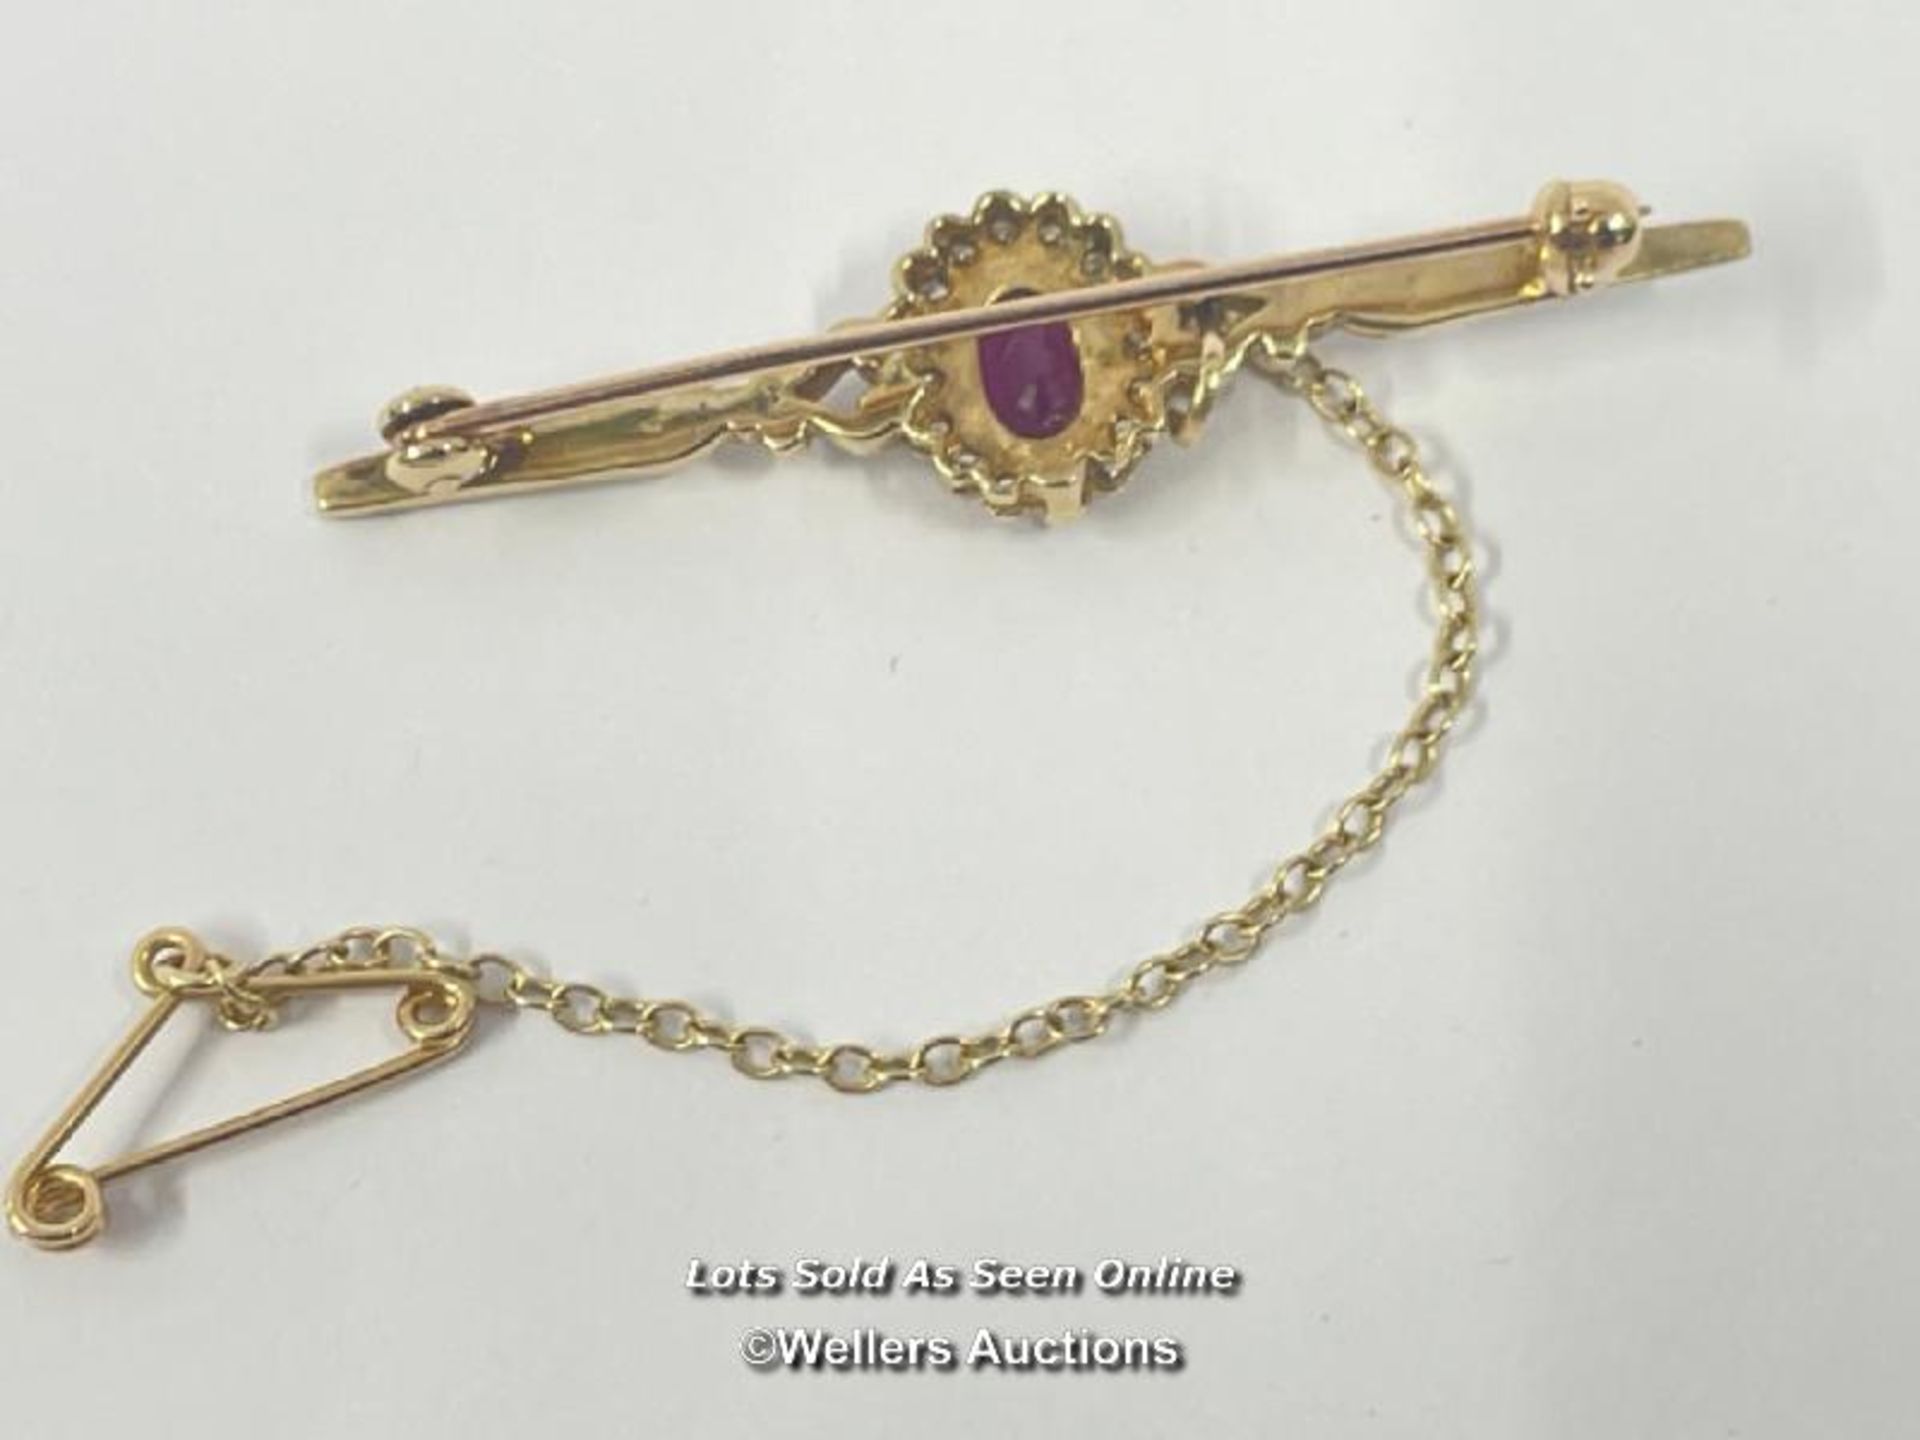 RUBY AND DIAMOND BAR BROOCH WITH SAFETY CHAIN, RUBY ESTIMATED WEIGHT 0.54CT, DIAMONDS ESTIMATED - Image 3 of 5